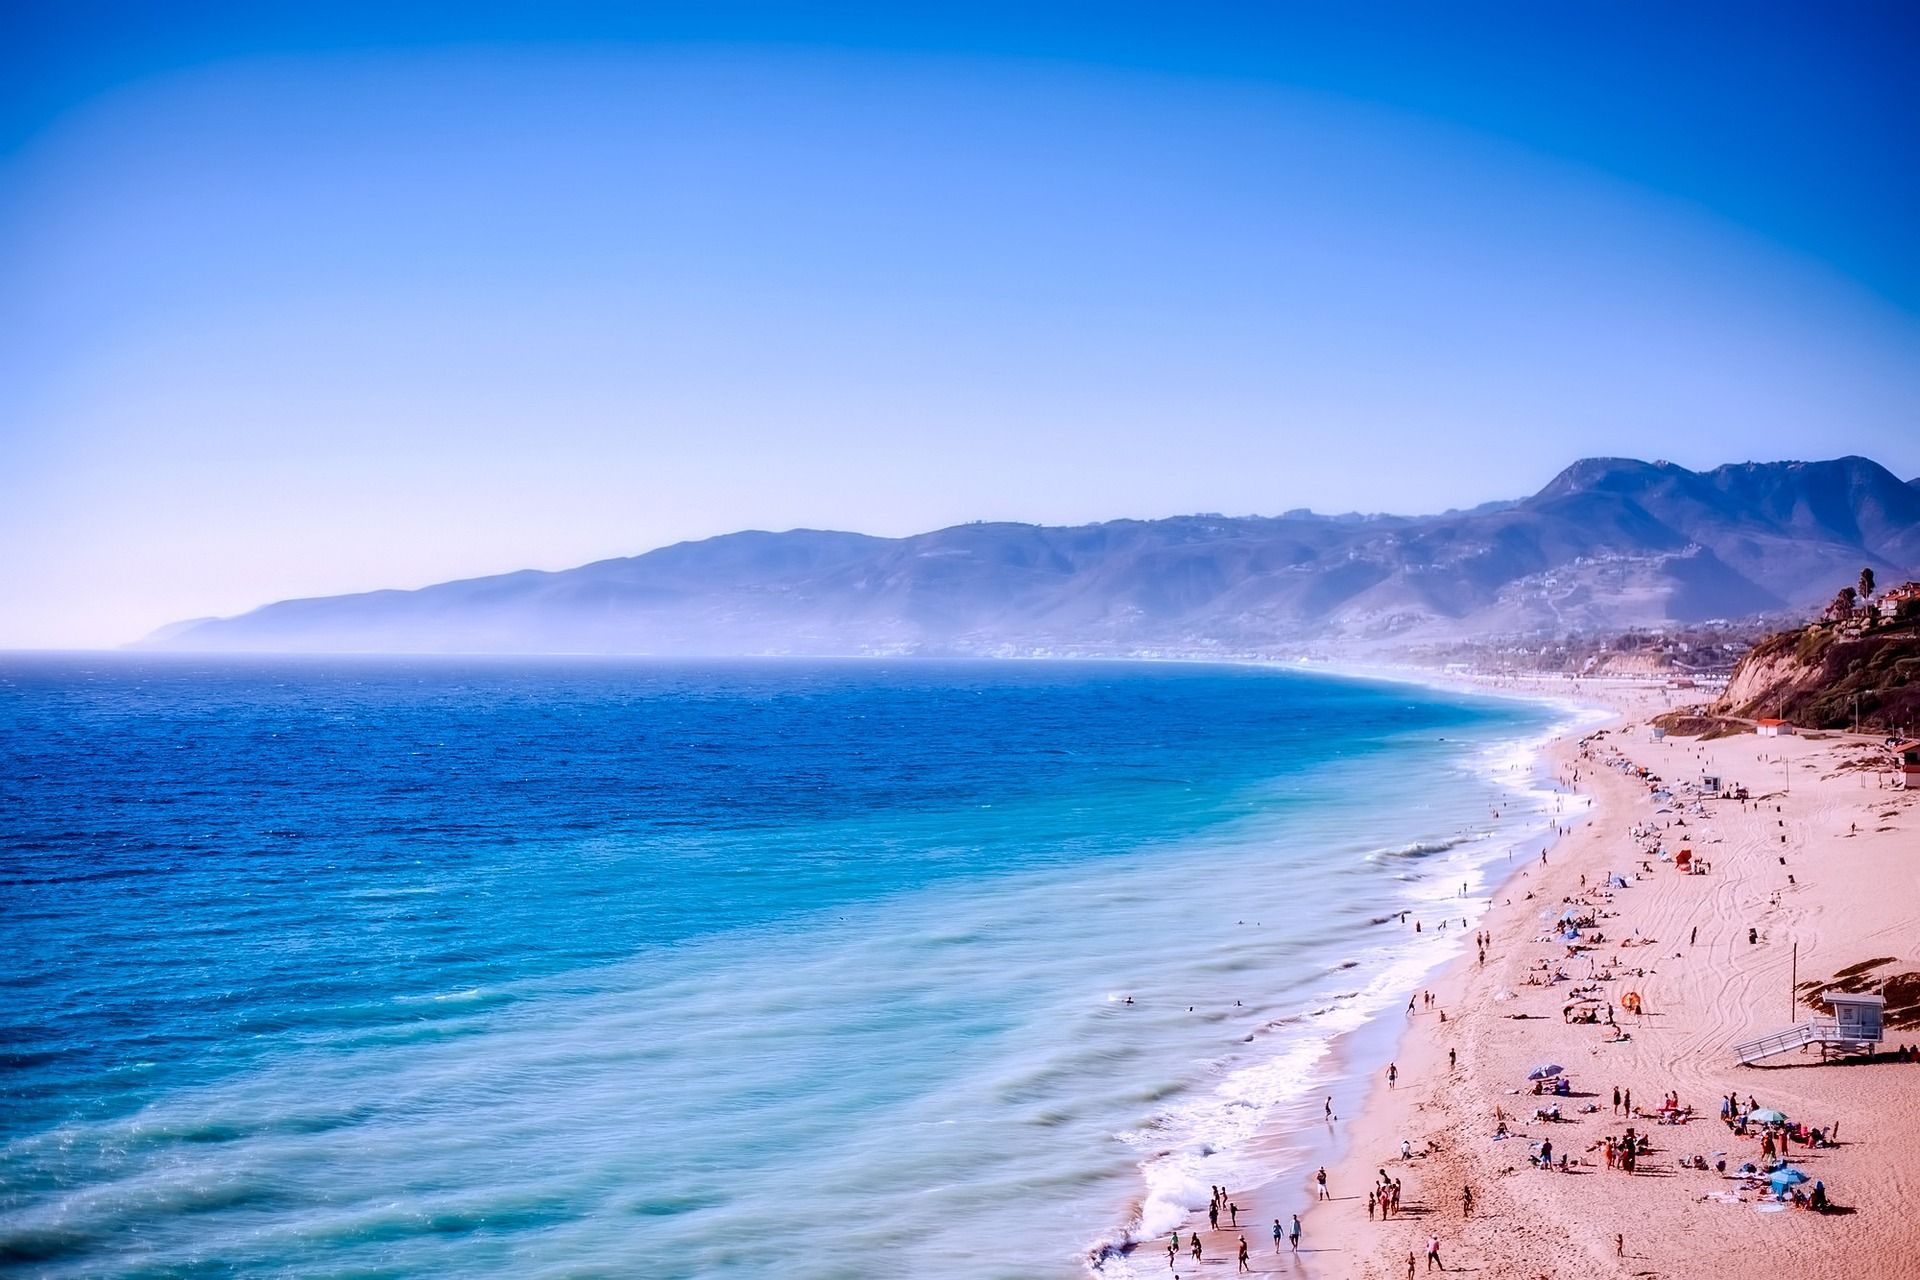 An aerial view of a sandy shore, a blue water body and a blue sky in Malibu